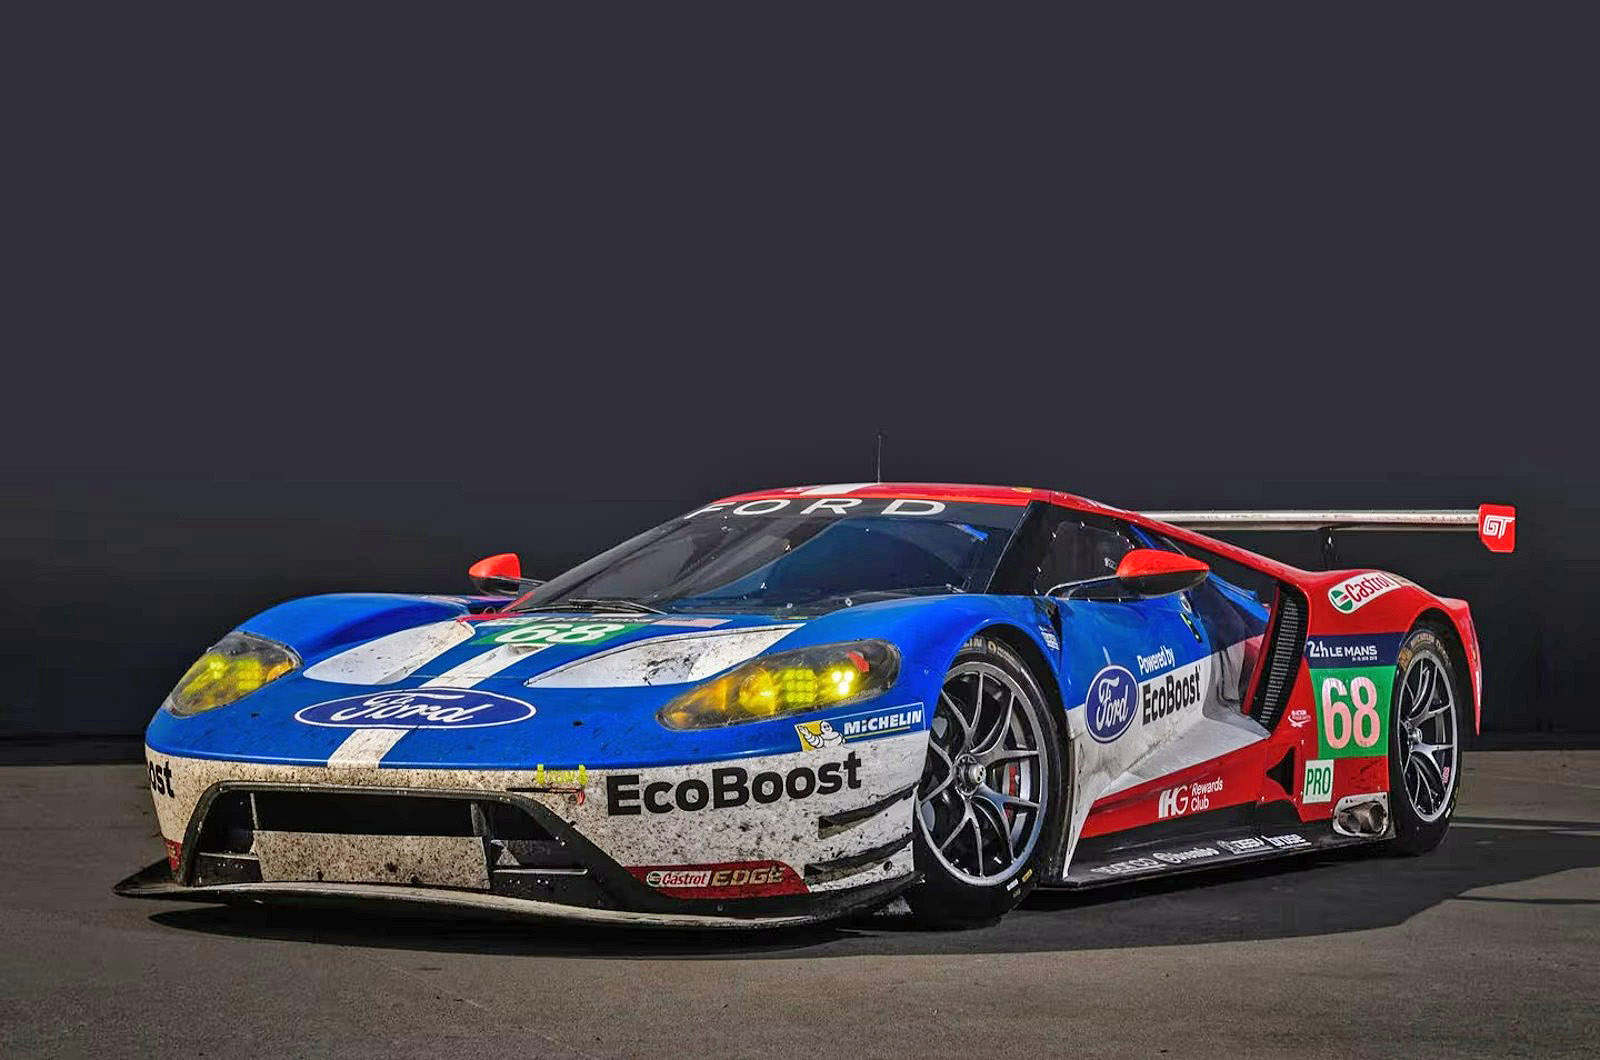 <p>The successor to the legendary GT40, the Ford GT returned to Le Mans in 2016 under the factory-supported Ford Chip Ganassi Racing Team. The car brought advanced racing technologies configured specially for the LM GTE-Pro class, ensuring competitive performance on endurance tracks.</p><p>The GT’s first-place finish at the 24 Hours of Le Mans in 2016 was historic, echoing Ford’s success 50 years earlier. The Ford GT also had consecutive 1-2 finishes at the 6 Hours of Fuji and Shanghai.</p>